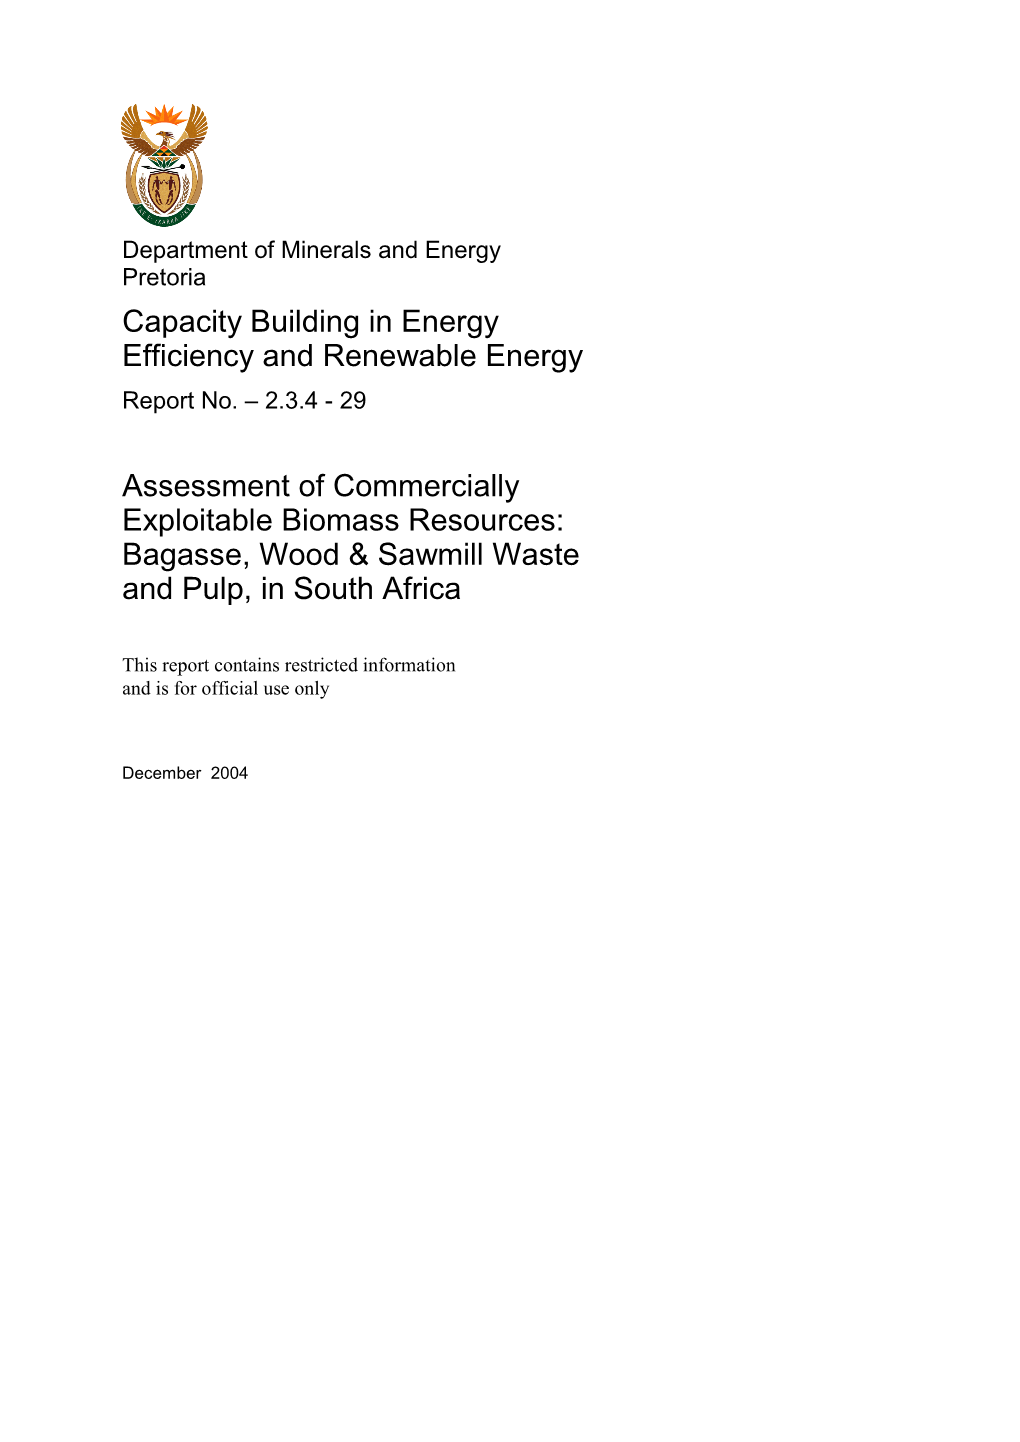 Economic and Financial Calculations and Modelling for the Renewable Energy Strategy Formulation, DME/Danida 2004